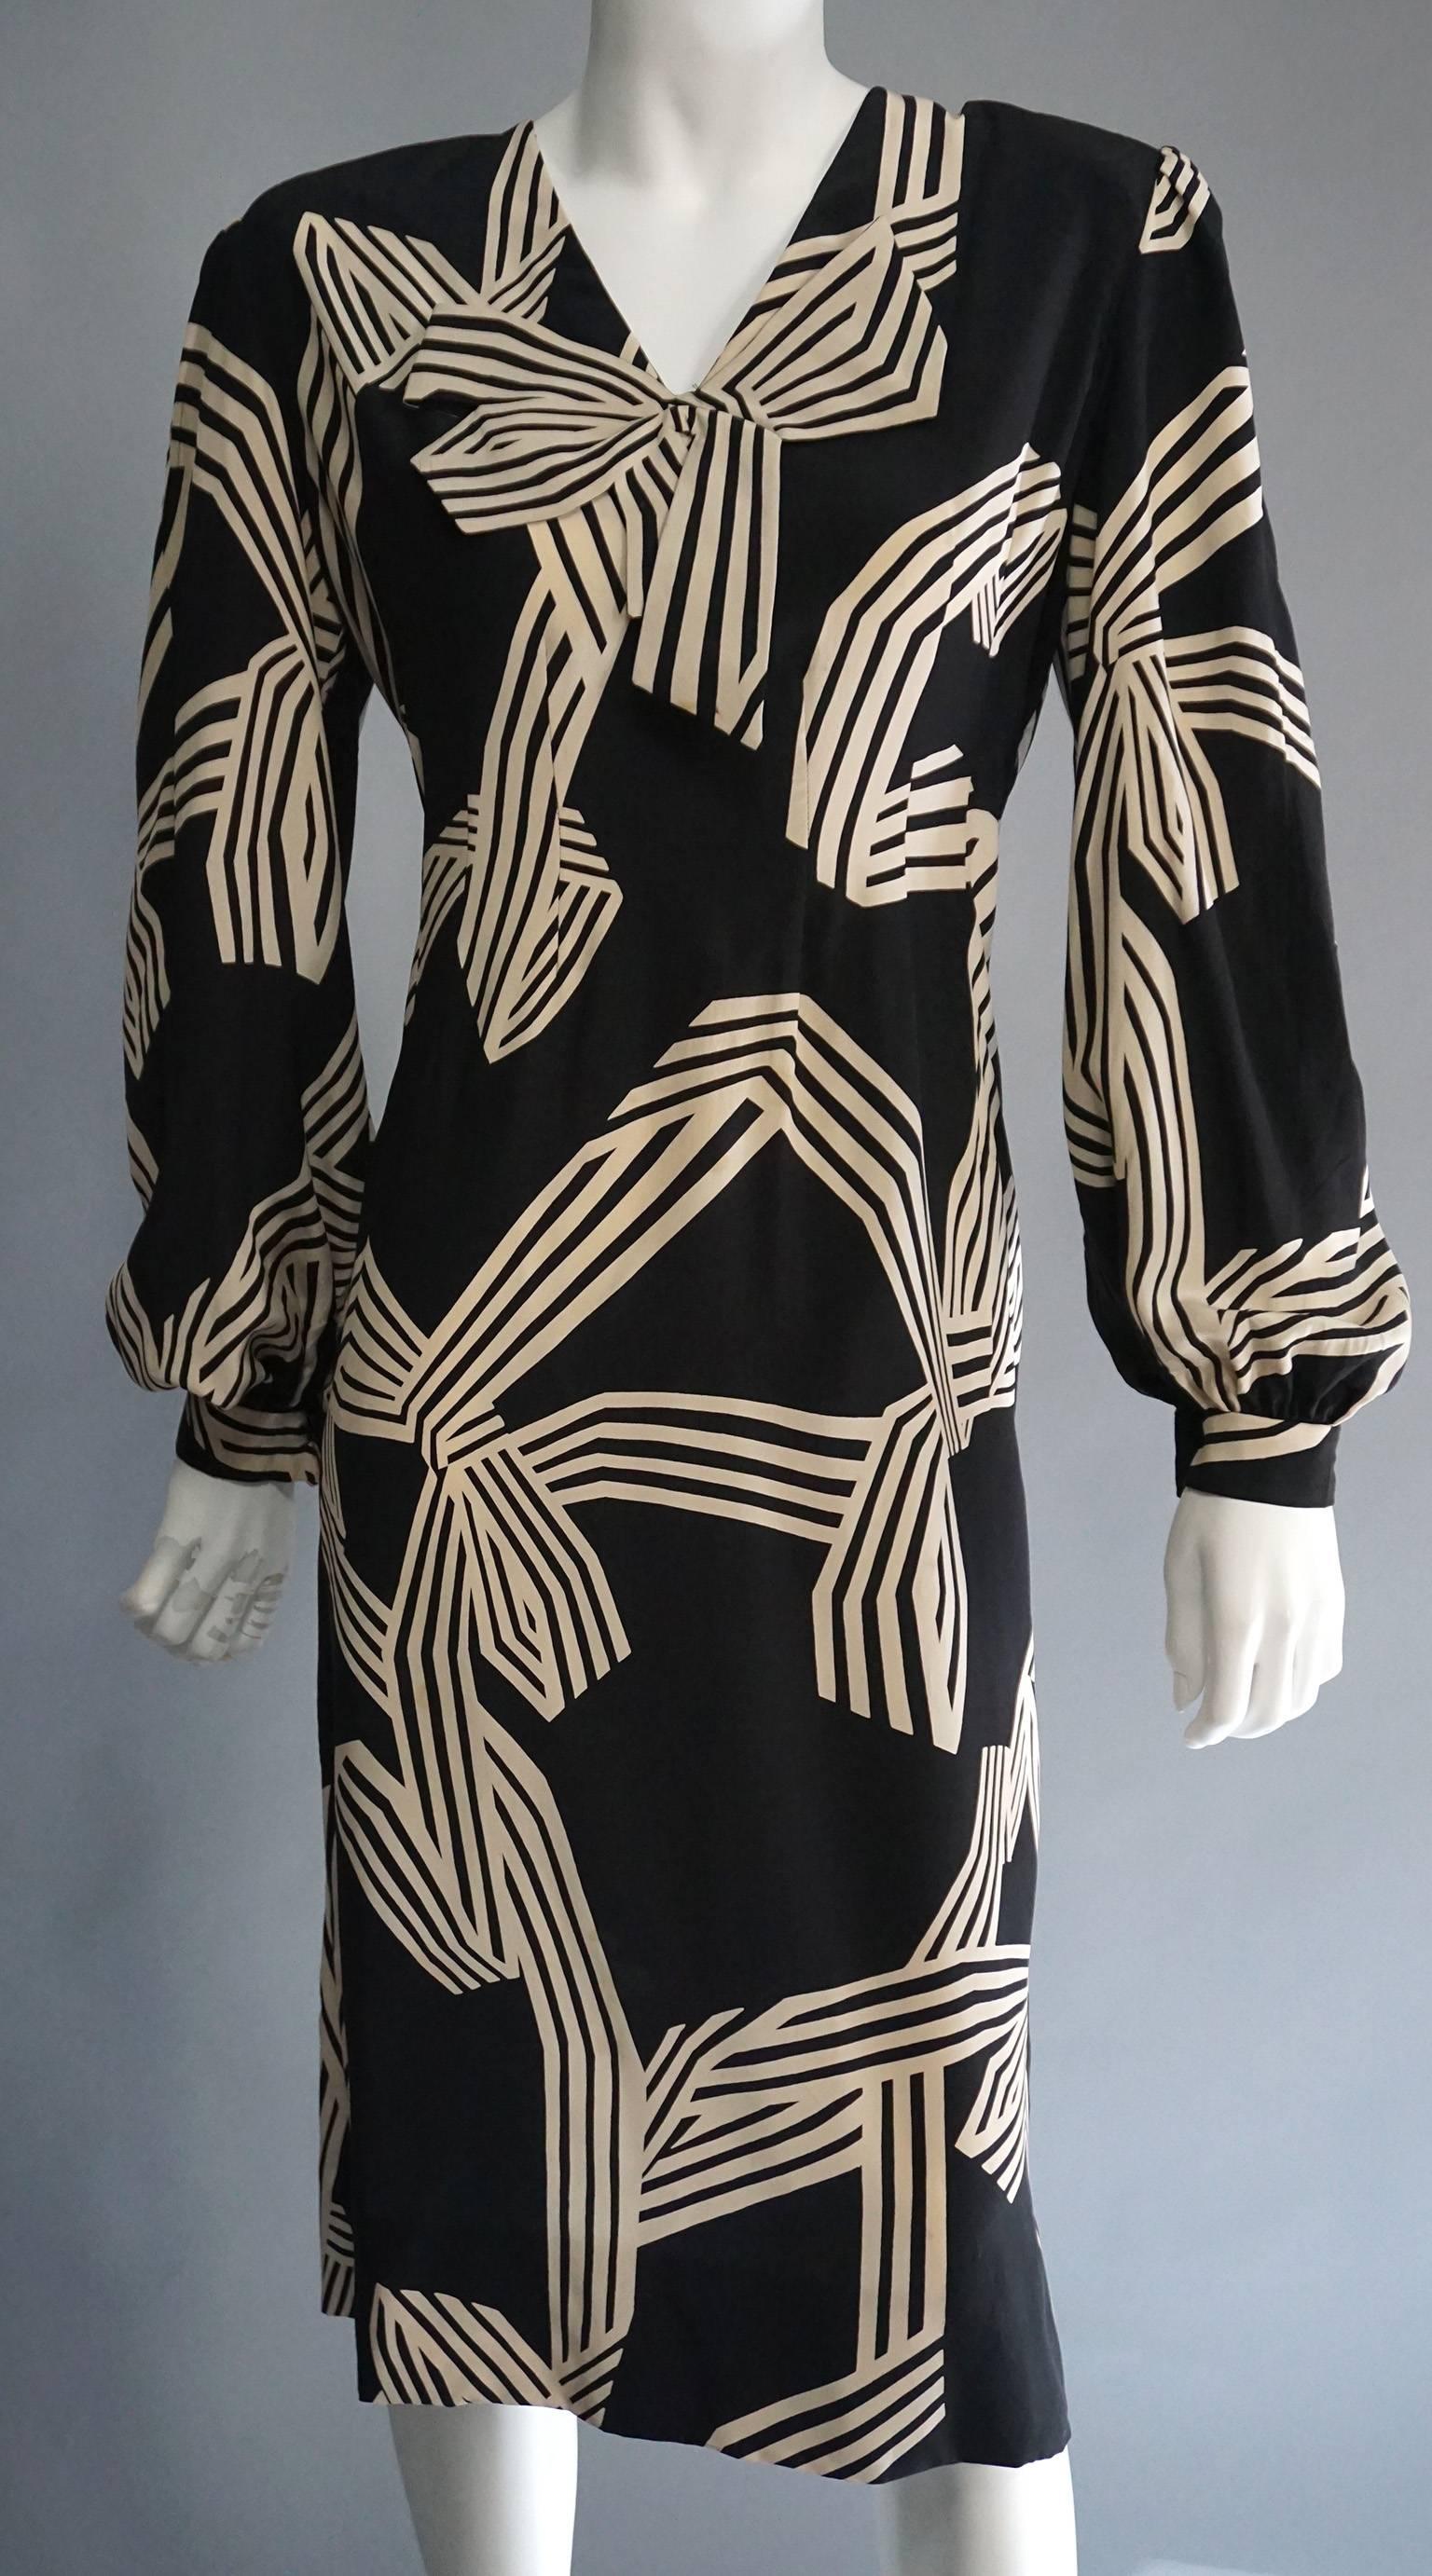 This graphic print PAULINE TRIGERE dress is classic, yet modern. The opposing colors create a vibrant, stripe print that references the fabric bow attached at the center of the neckline. The puff sleeves are capped with small cuffs with a single